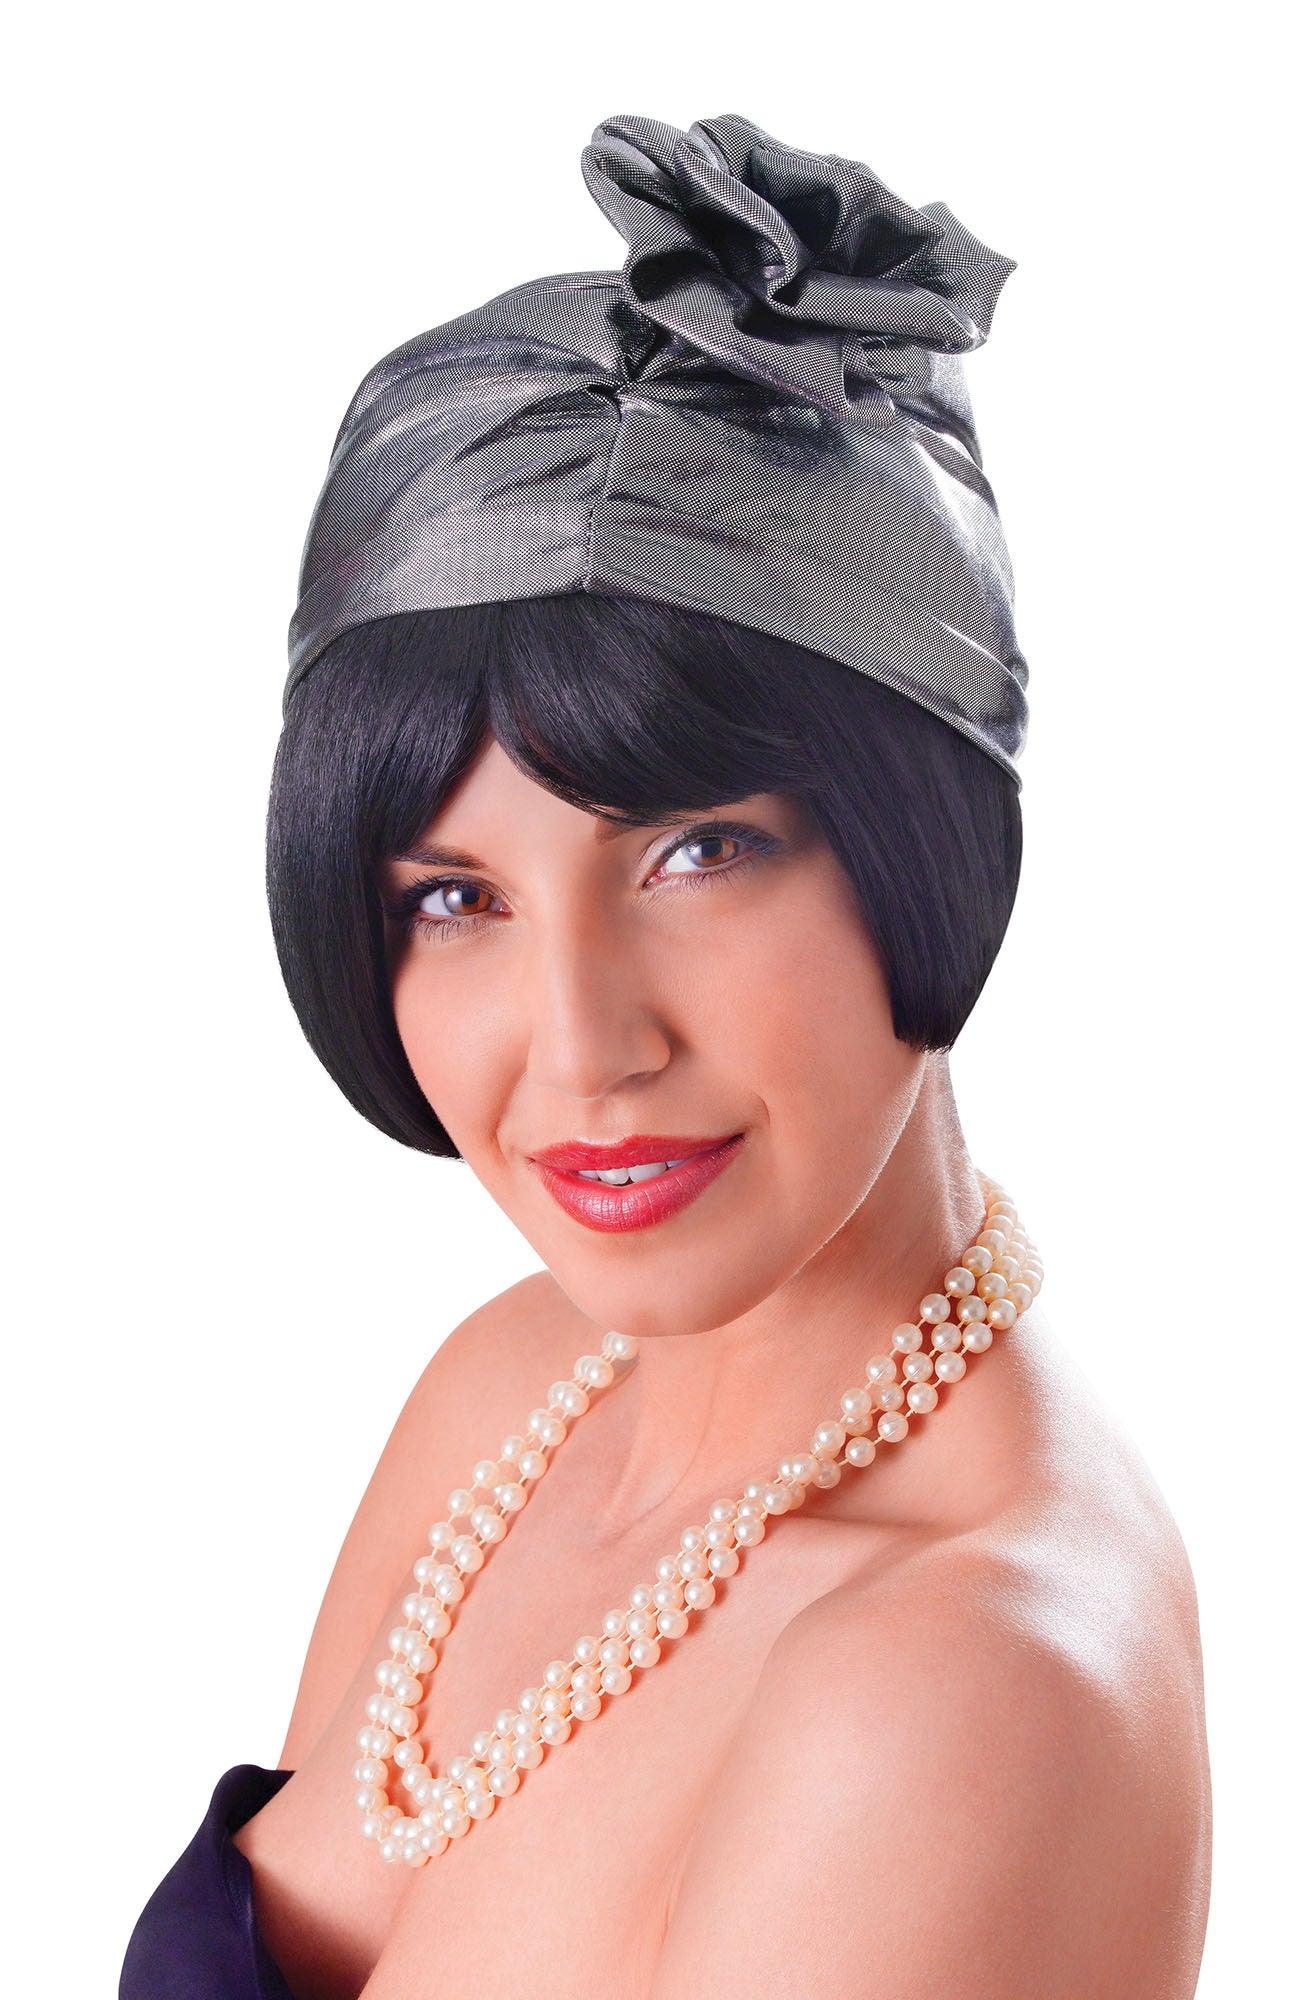 Ladies Girls 20’s Cloche Hat Charleston Fancy Dress Party Costume Accessory - Labreeze